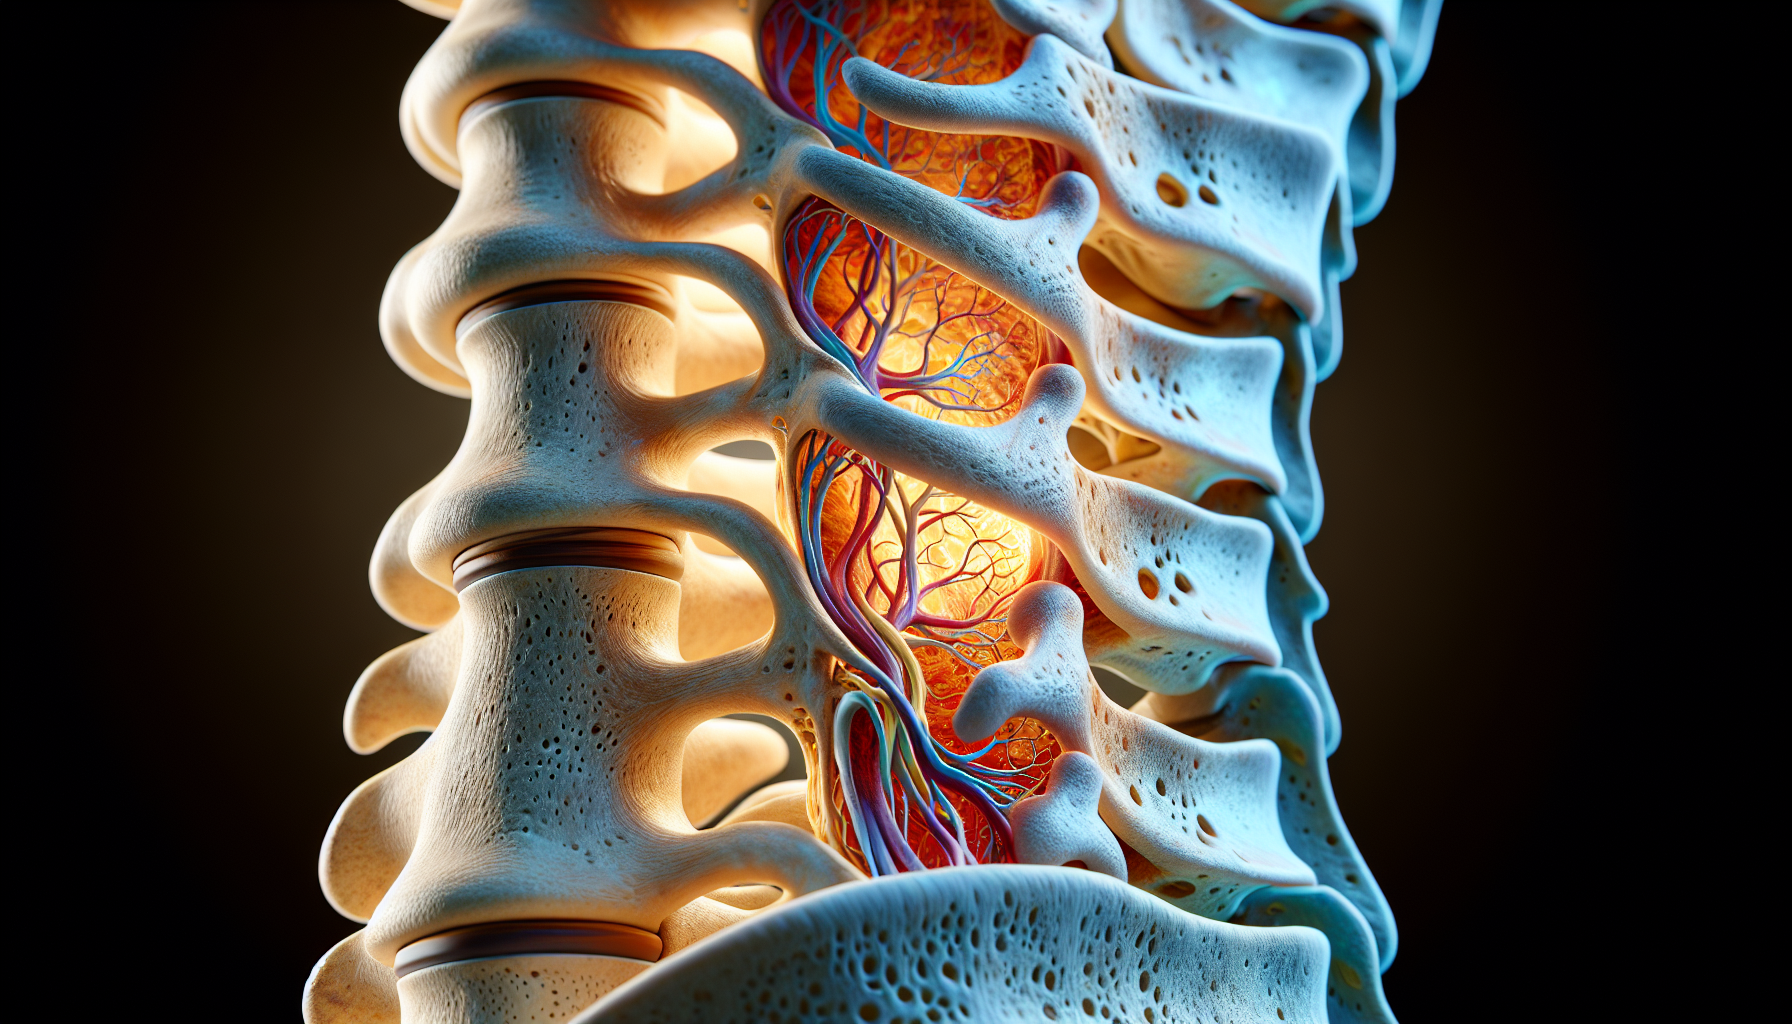 An illustration of a human spine with highlighted areas of stenosis